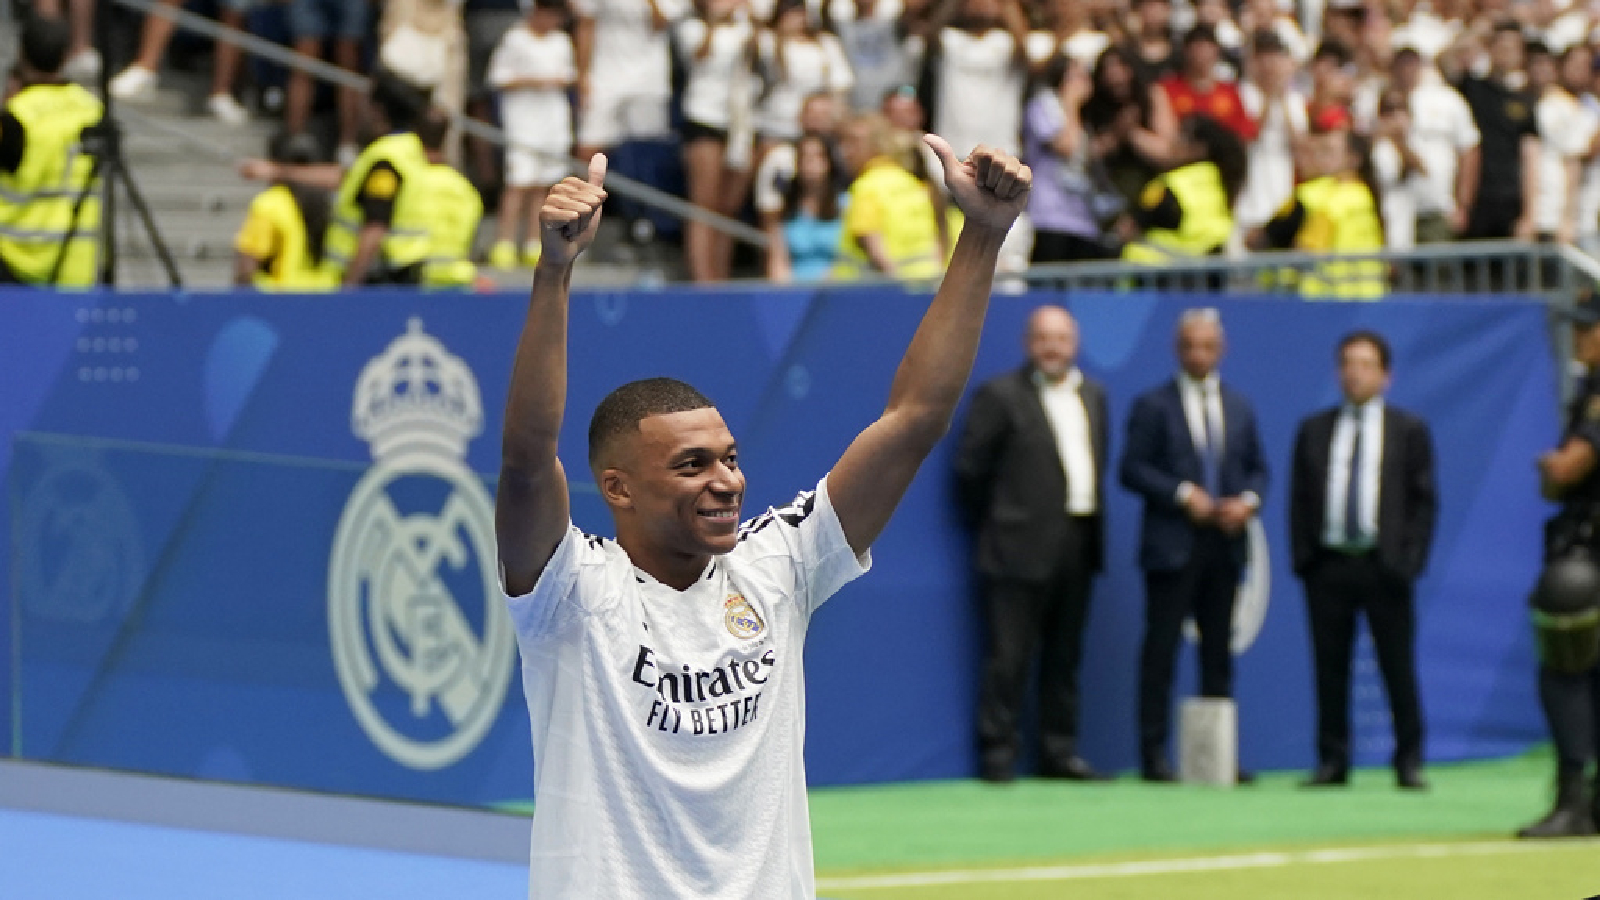 BREAKING! Mbappe Unveiled as Newest Galactico! Majestic Madrid Debut awaits